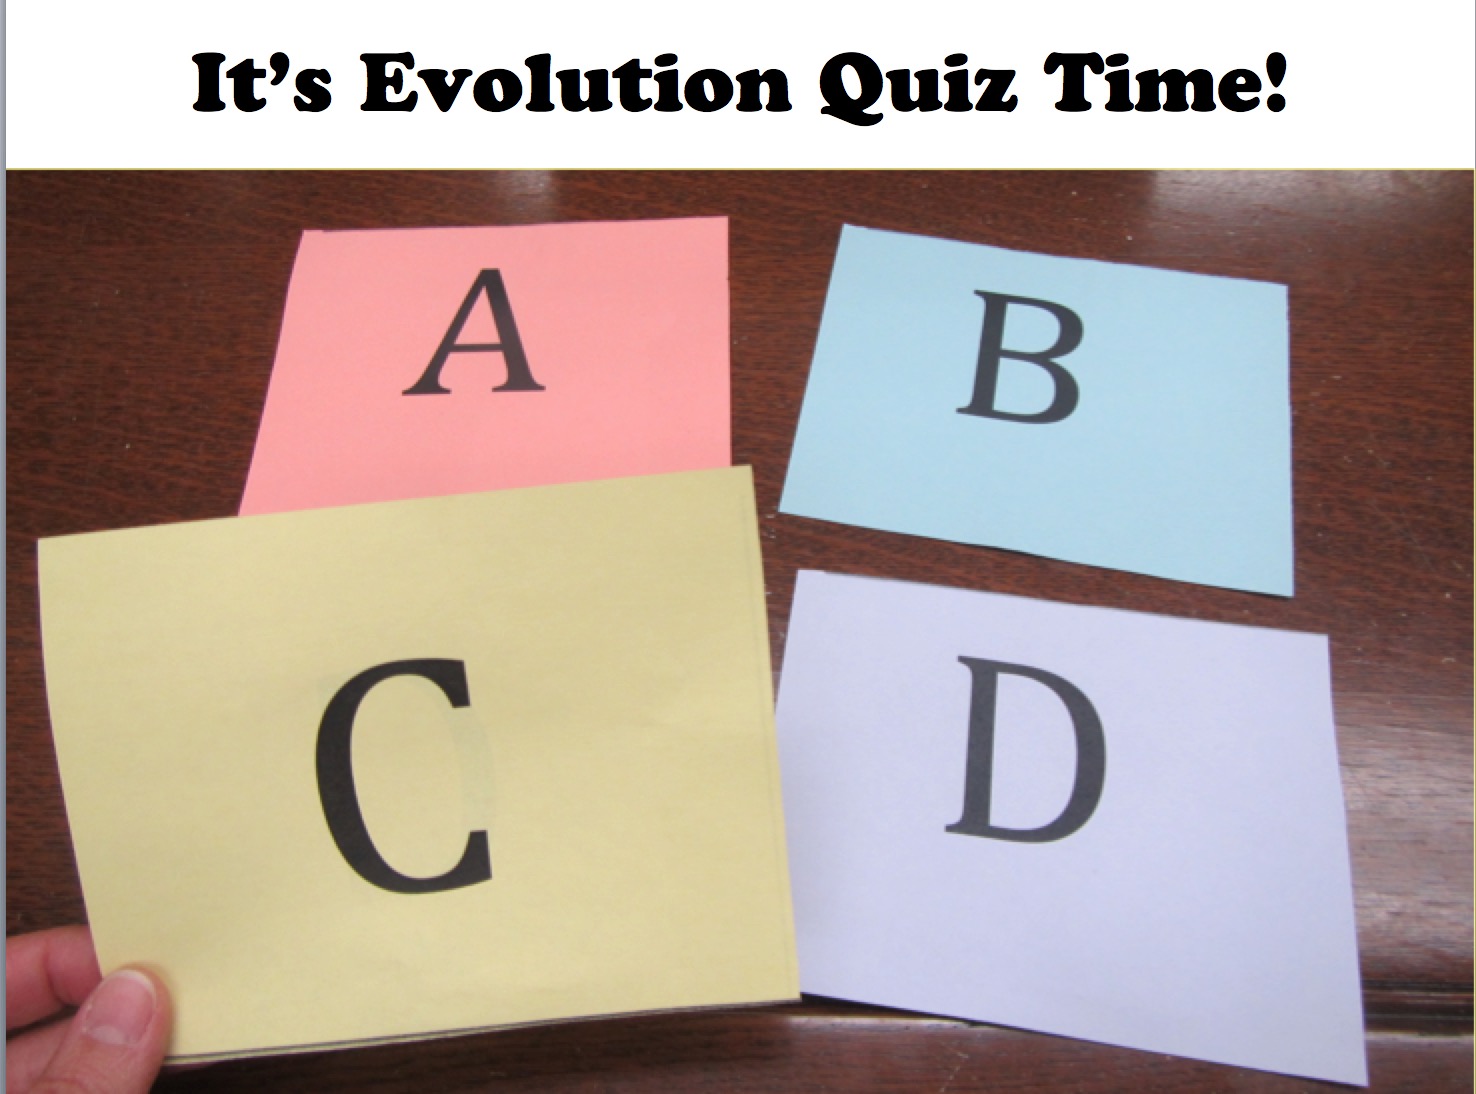 "Boost your evolution IQ": An evolution misconceptions game